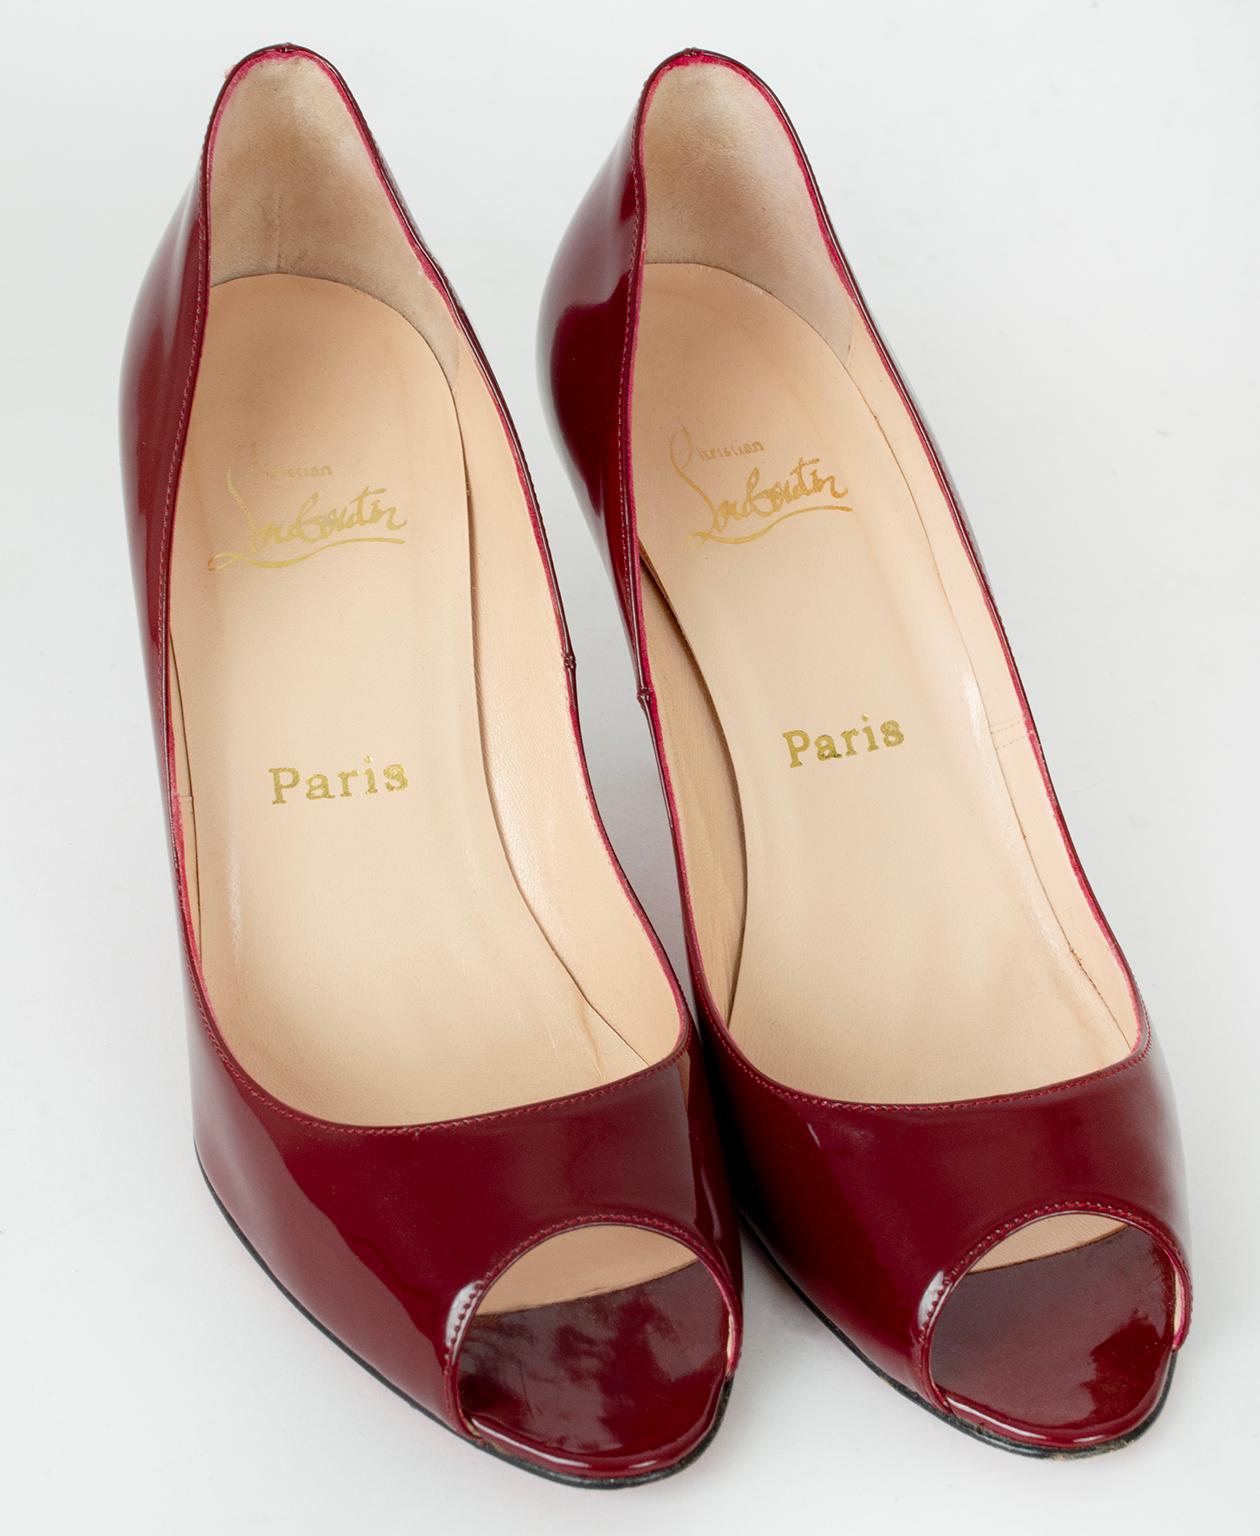 Christian Louboutin Burgundy Patent Clare Peep Toe Stiletto, 80 mm - 39, 2002 For Sale 2